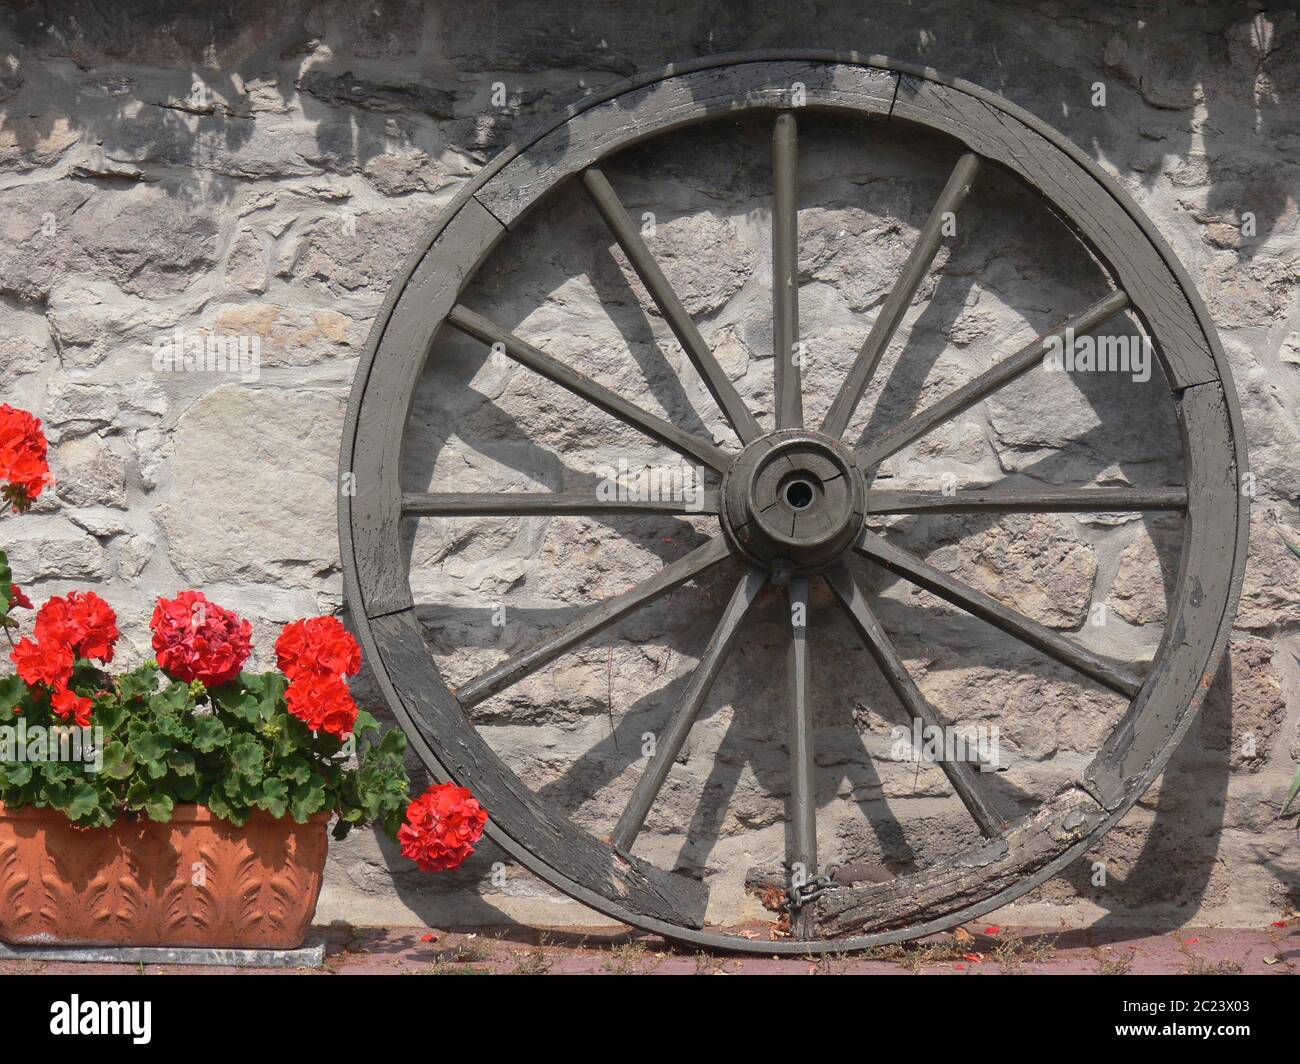 Wooden wheel with wooden spokes next to red flowers Stock Photo